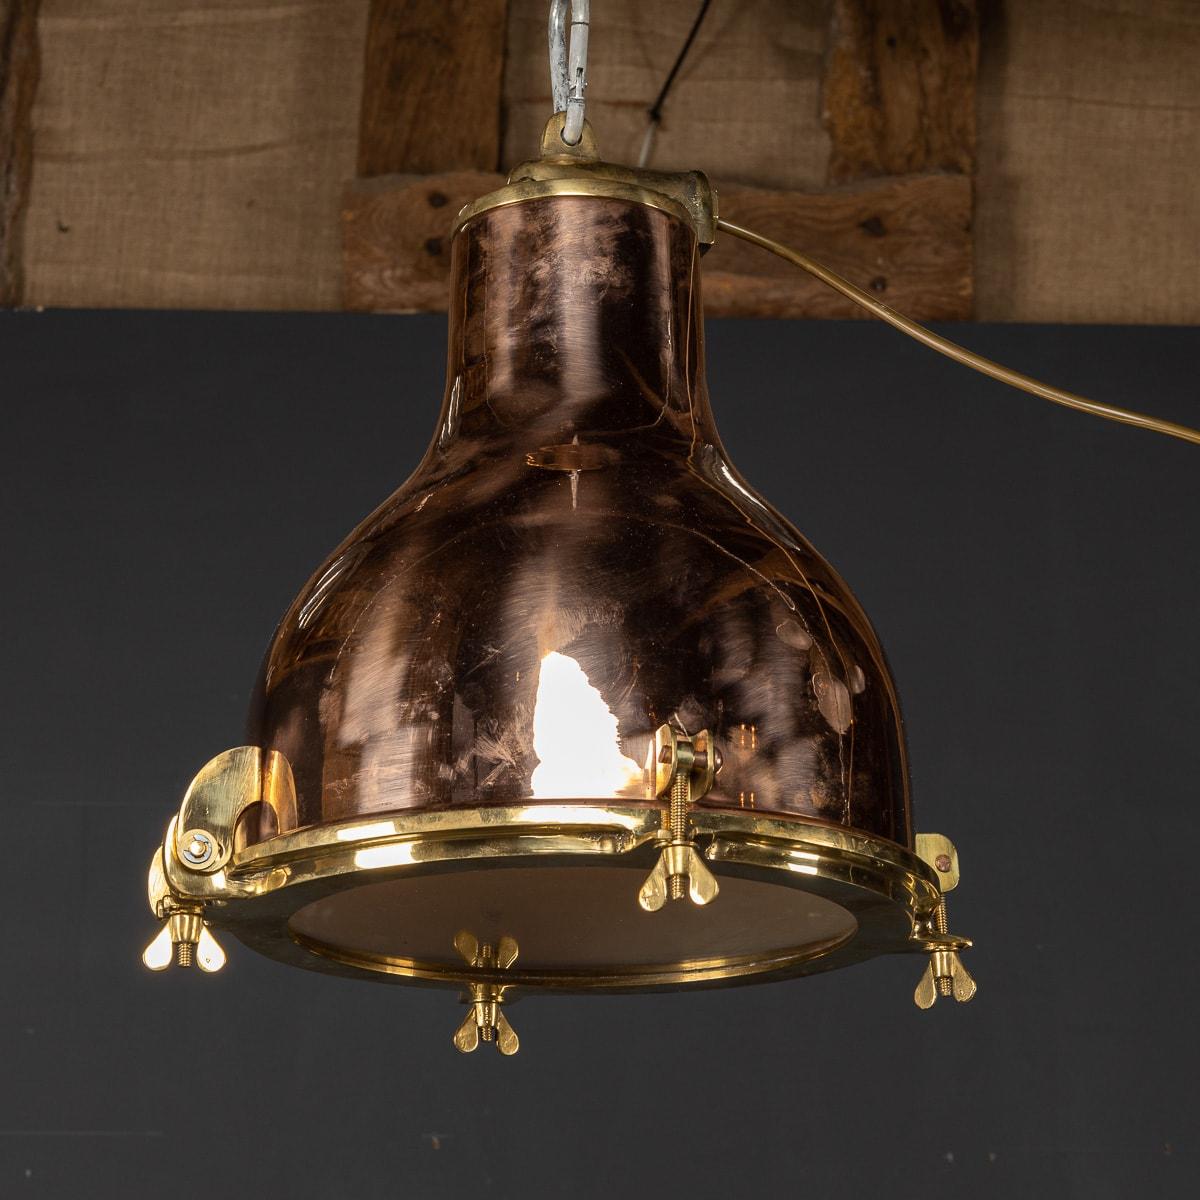 20th Century Danish Polished Brass Cargo Ship Light In Good Condition For Sale In Royal Tunbridge Wells, Kent